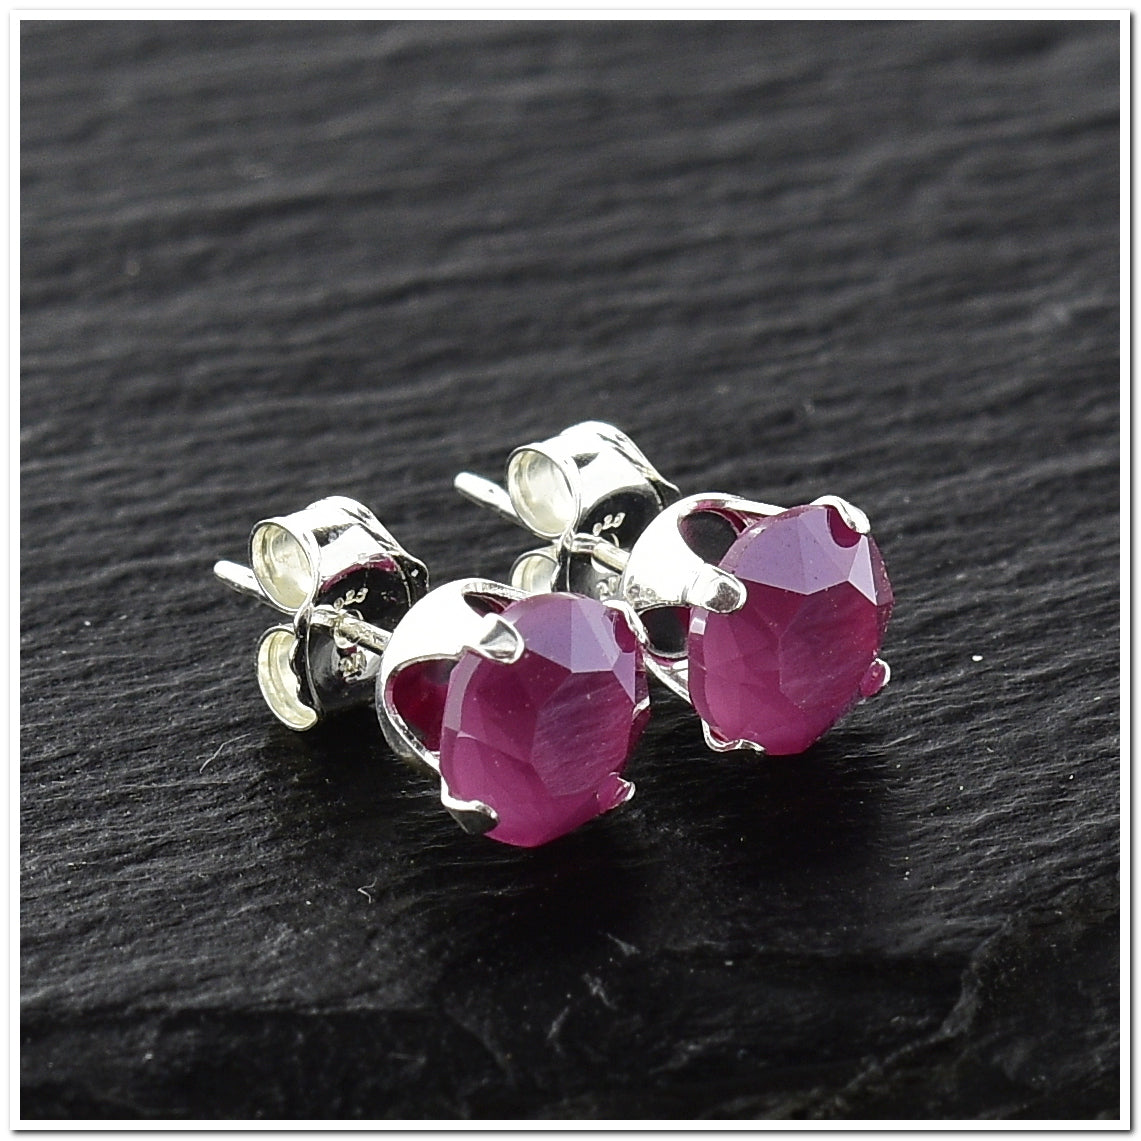 pewterhooter® Women's Classic Collection 925 Sterling silver earrings with sparkling Peony Pink crystals, packaged in a gift box for any occasion.